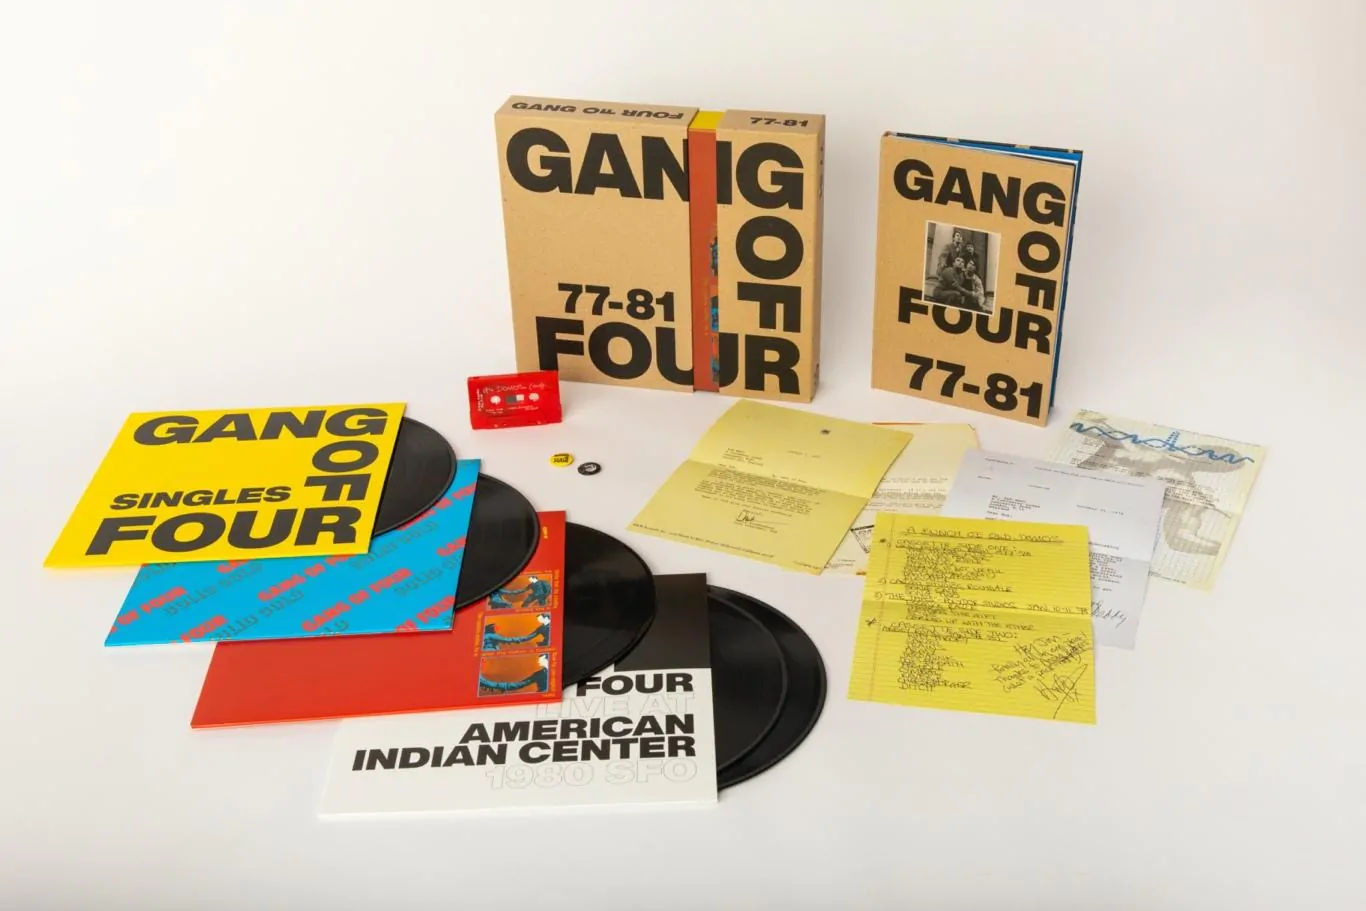 GANG OF FOUR announce 77-81 box set - out March 12th 